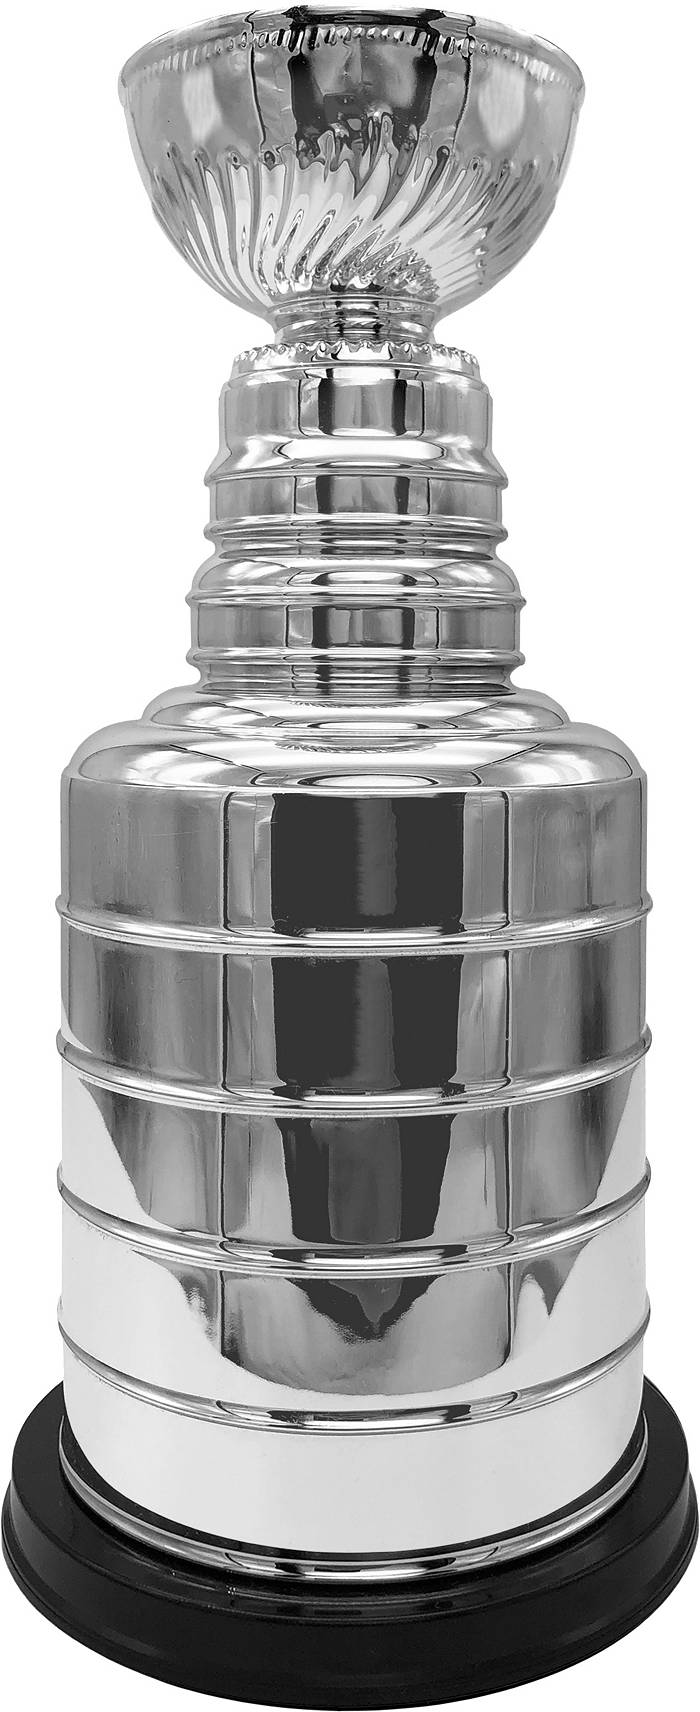 Stanley cup - collectibles - by owner - sale - craigslist